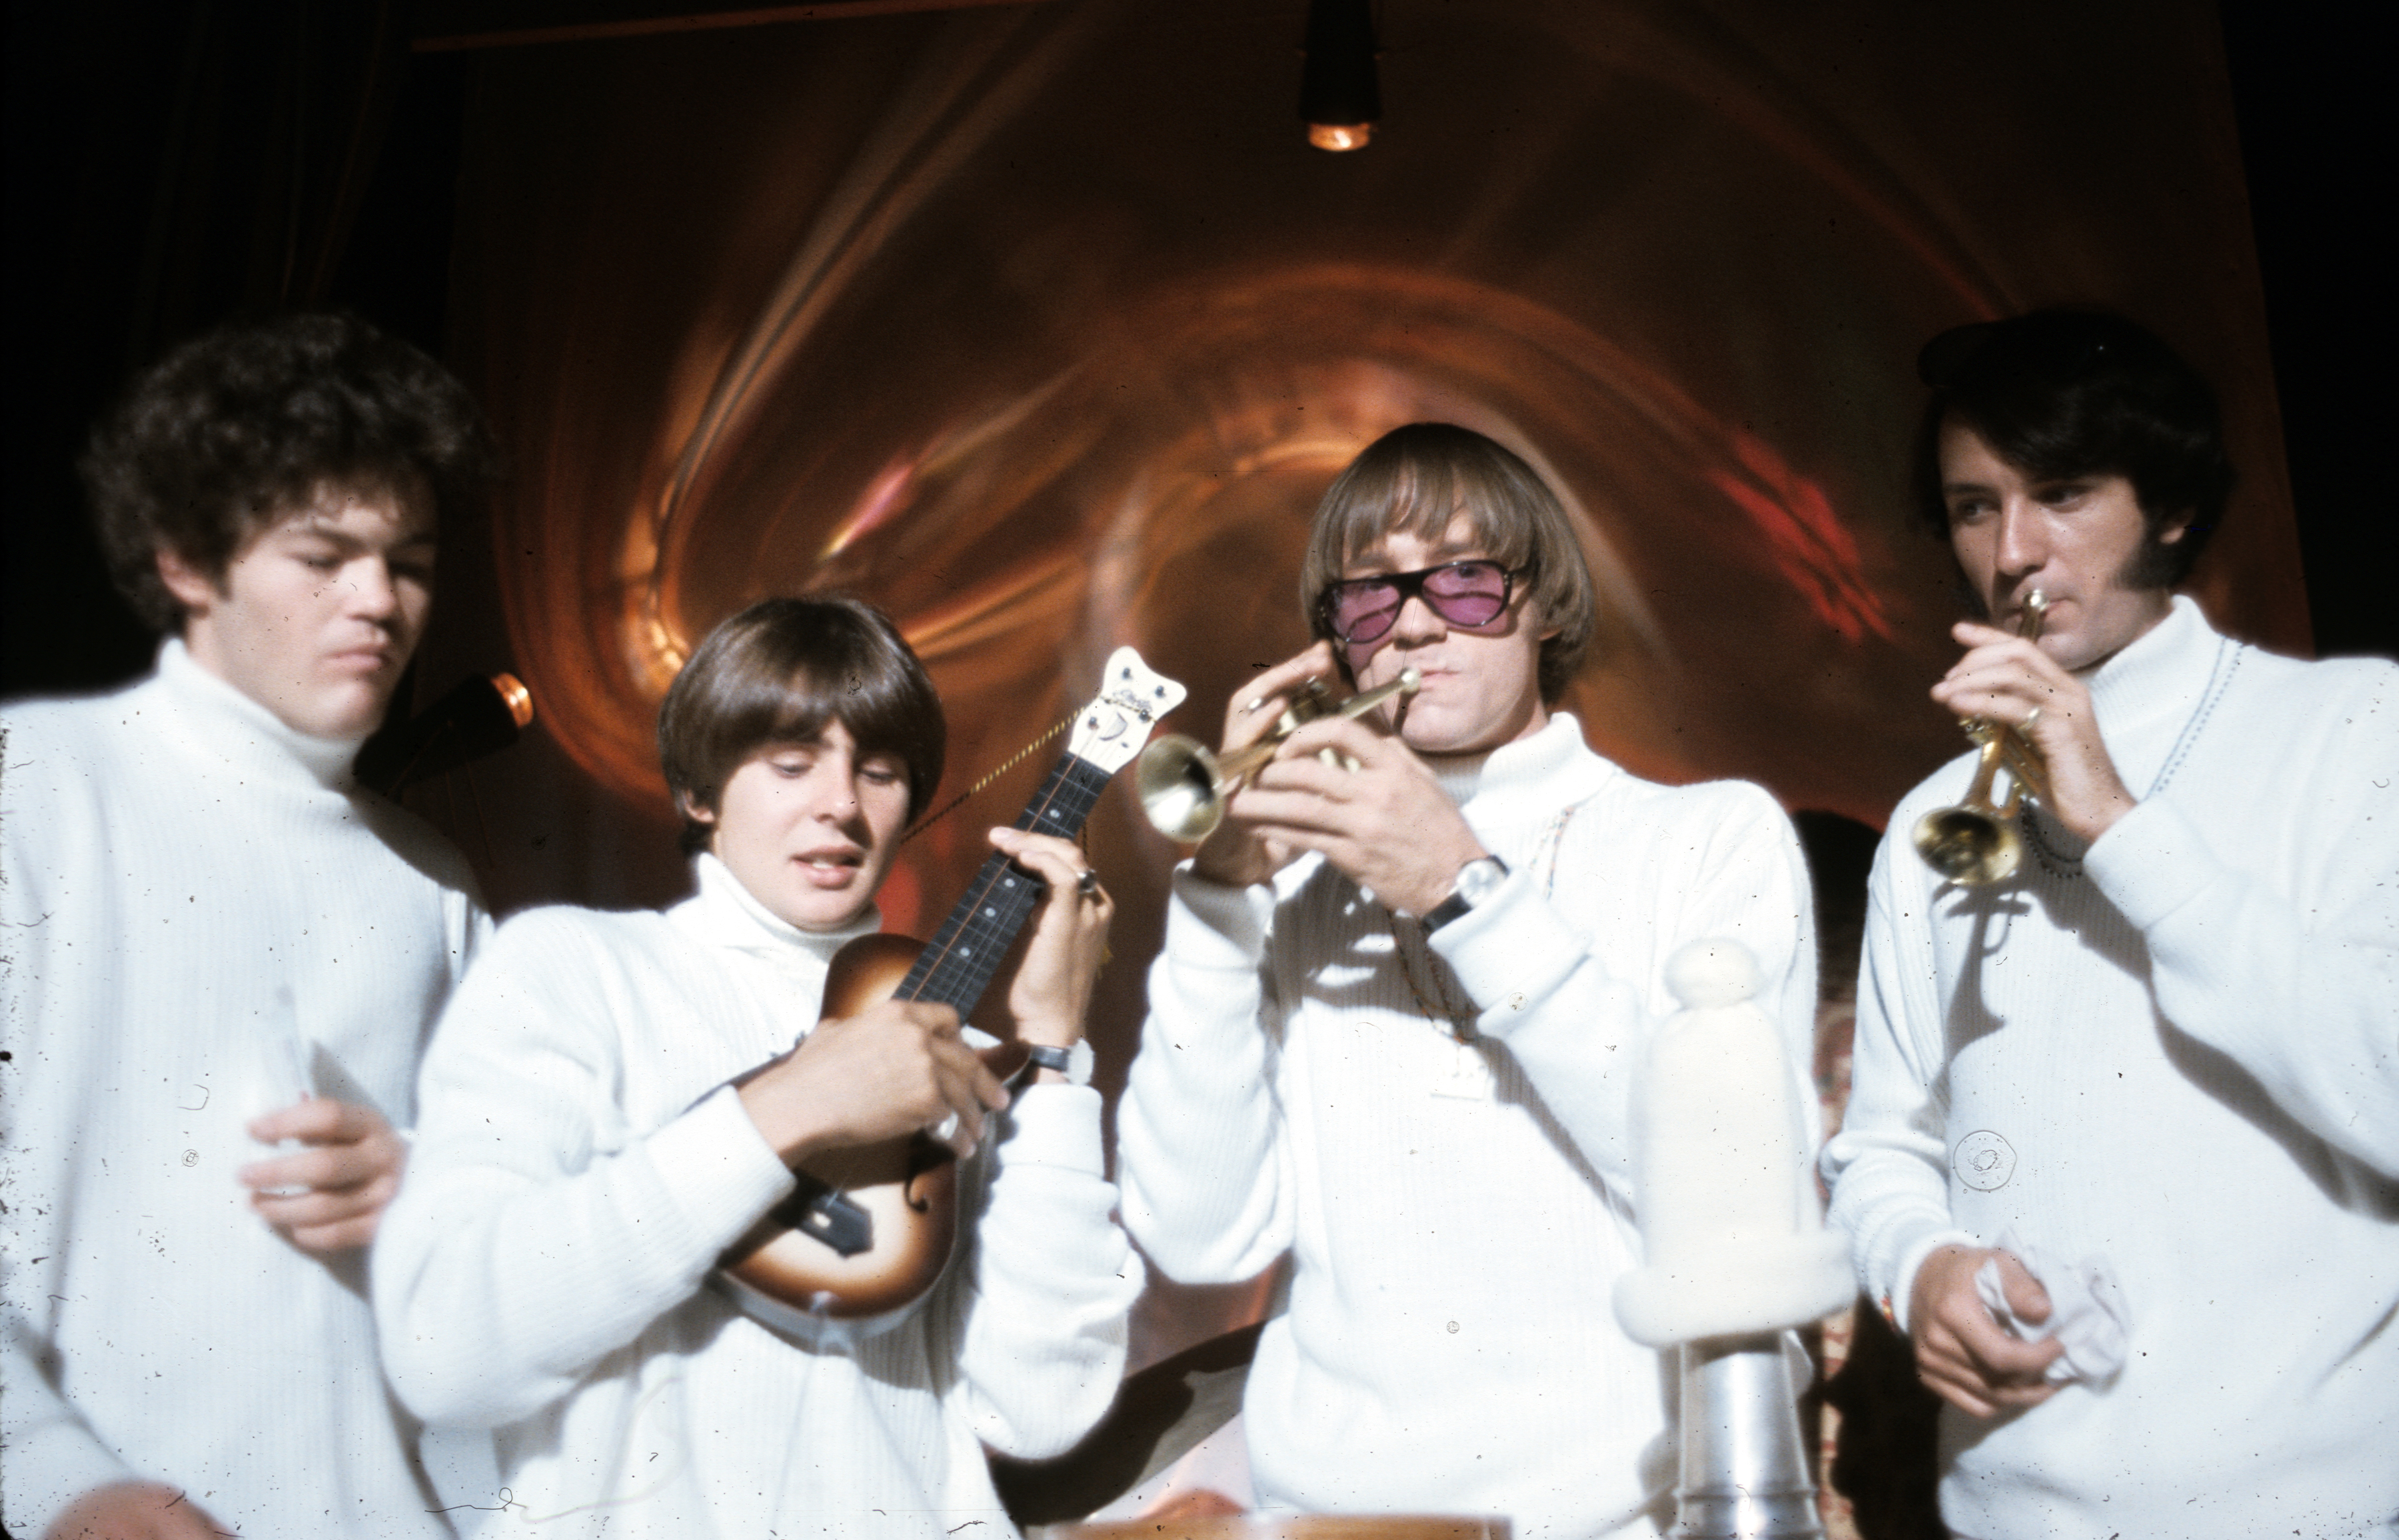 The Monkees Started Out as a TV Band, But Their Legacy Lives On